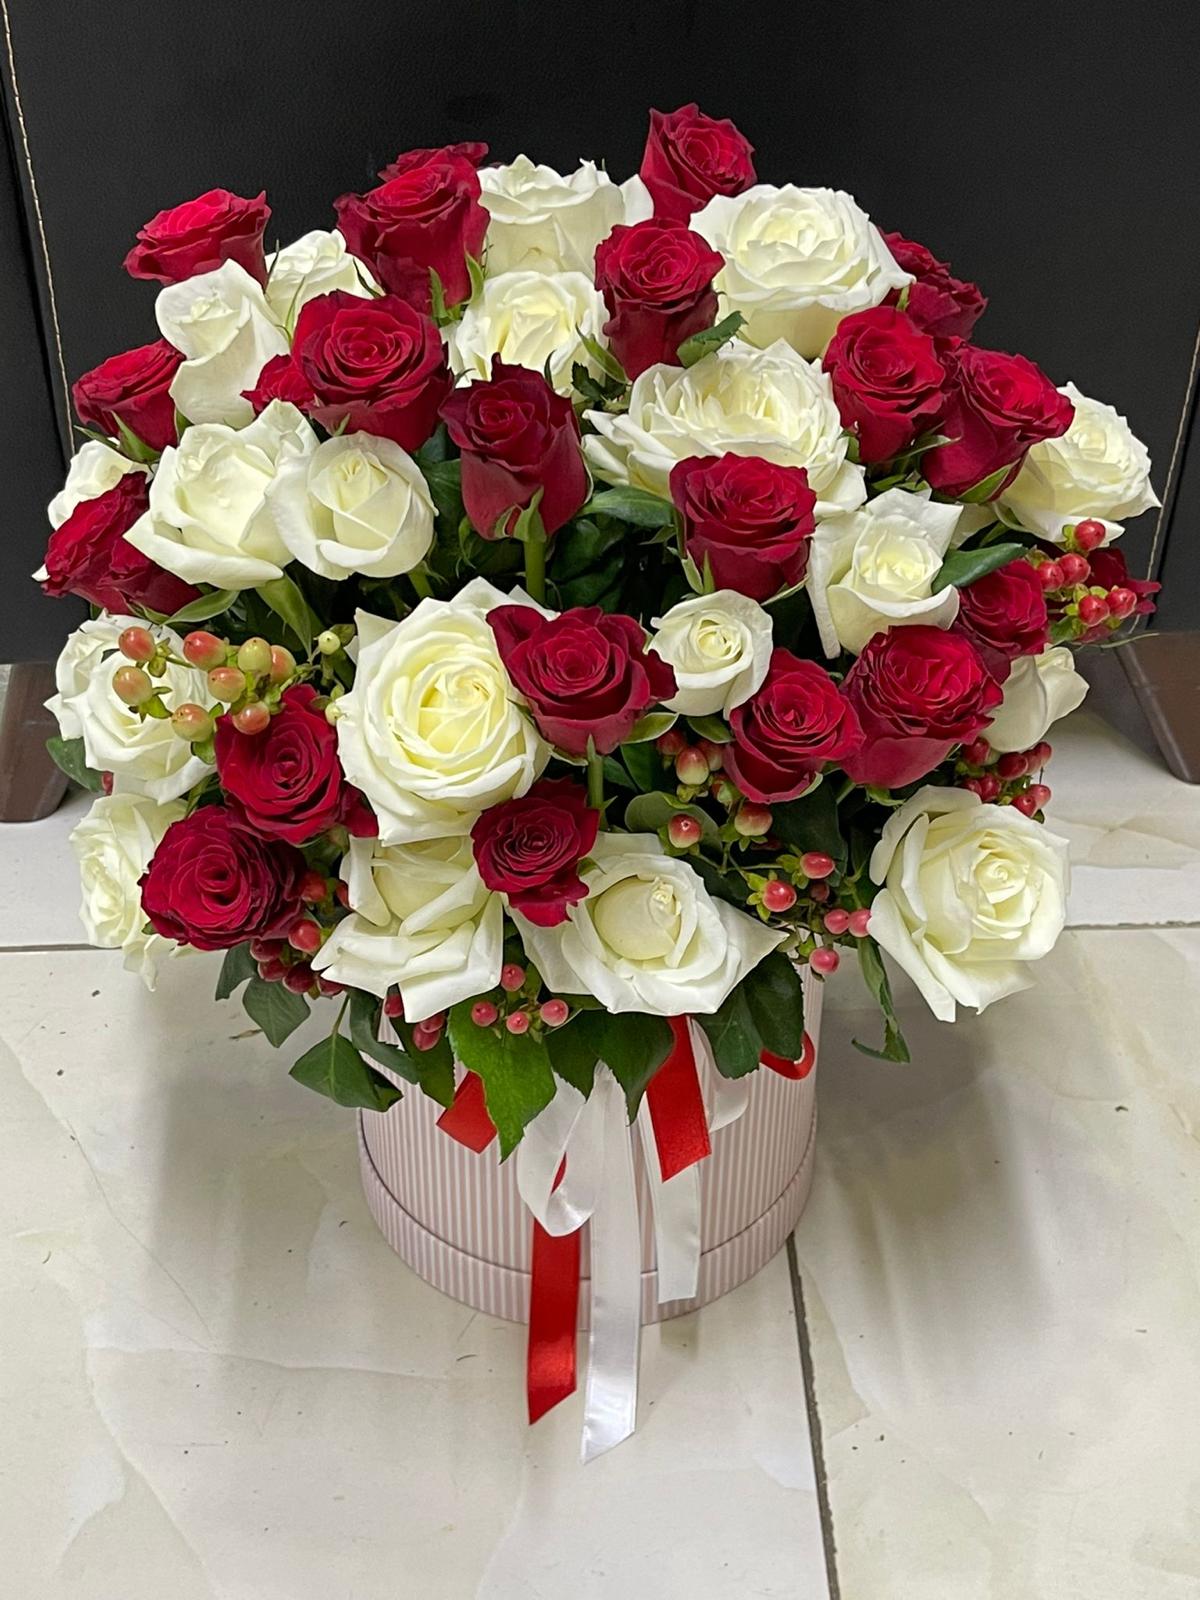  Kemer Blumenbestellung White & Red Roses 51 Pieces in a Box